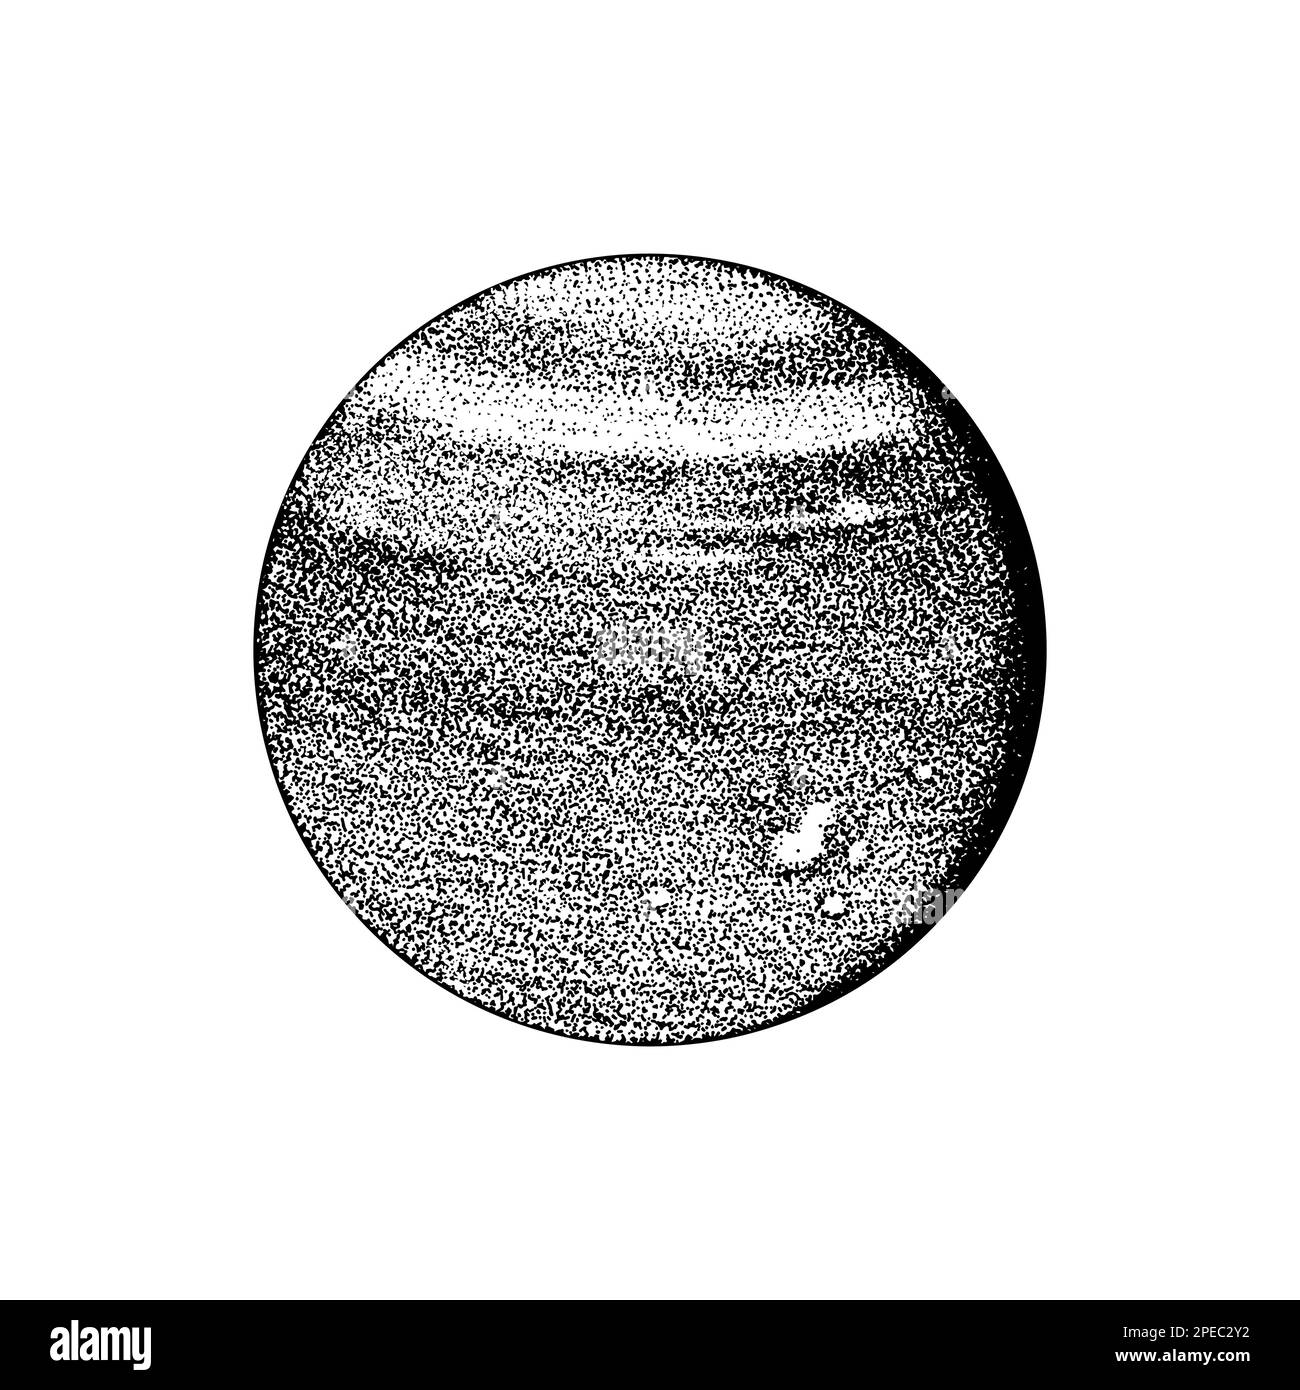 Uranus Planet. Ice giants. Astronomical galaxy space. Engraved hand drawn in old sketch, vintage style for label. Stock Vector